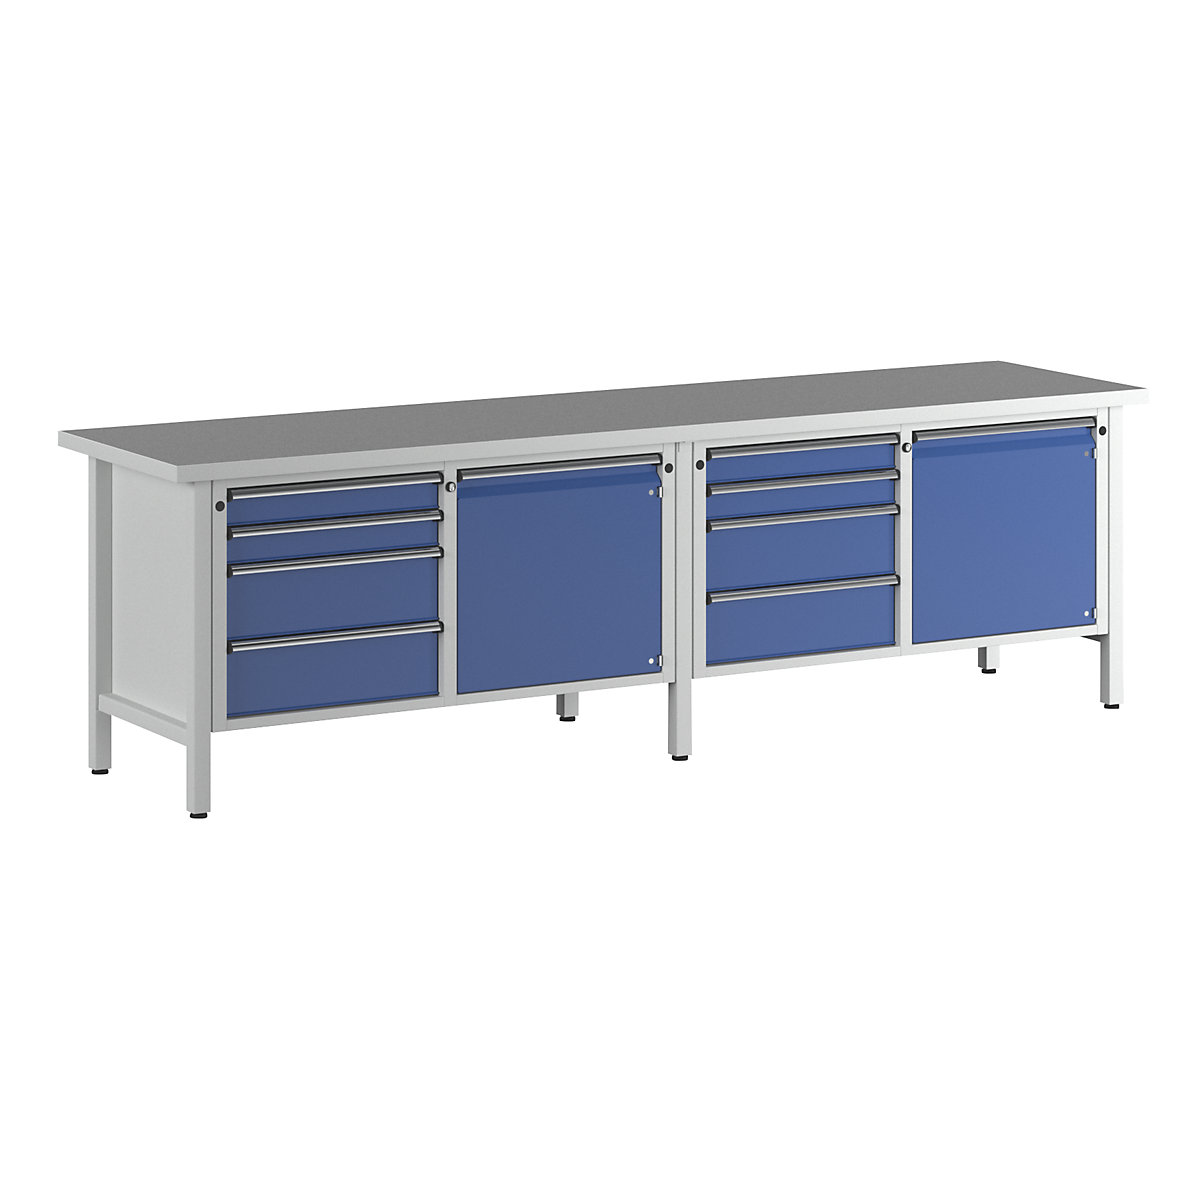 Workbench width 2800 mm, frame construction – ANKE, 2 doors, 8 drawers with full extension, universal worktop-10